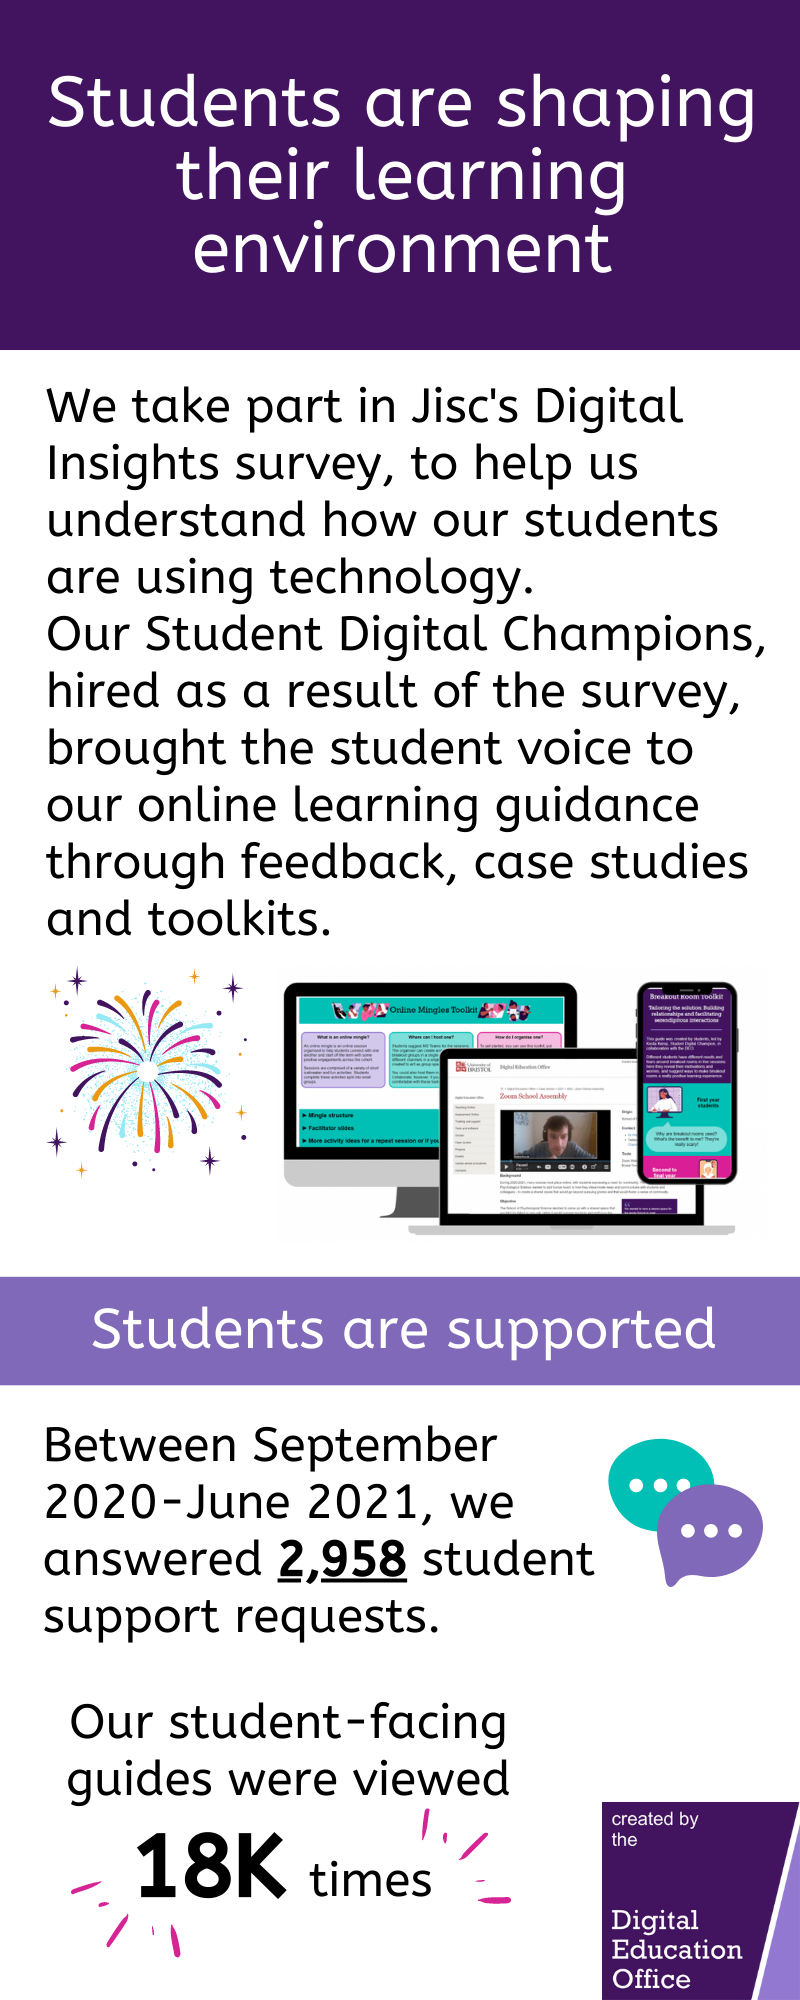 Students are shaping their learning environment. Our Student Digital Champions, hired as a result of Jisc's Digital Insights survey, brought the student voice to our online learning guidance. Students are supported. Between Sept 2020-June 2021, we answered 2,958 student support requests. Our student-facing guides were viewed 18K times. Click for more details.